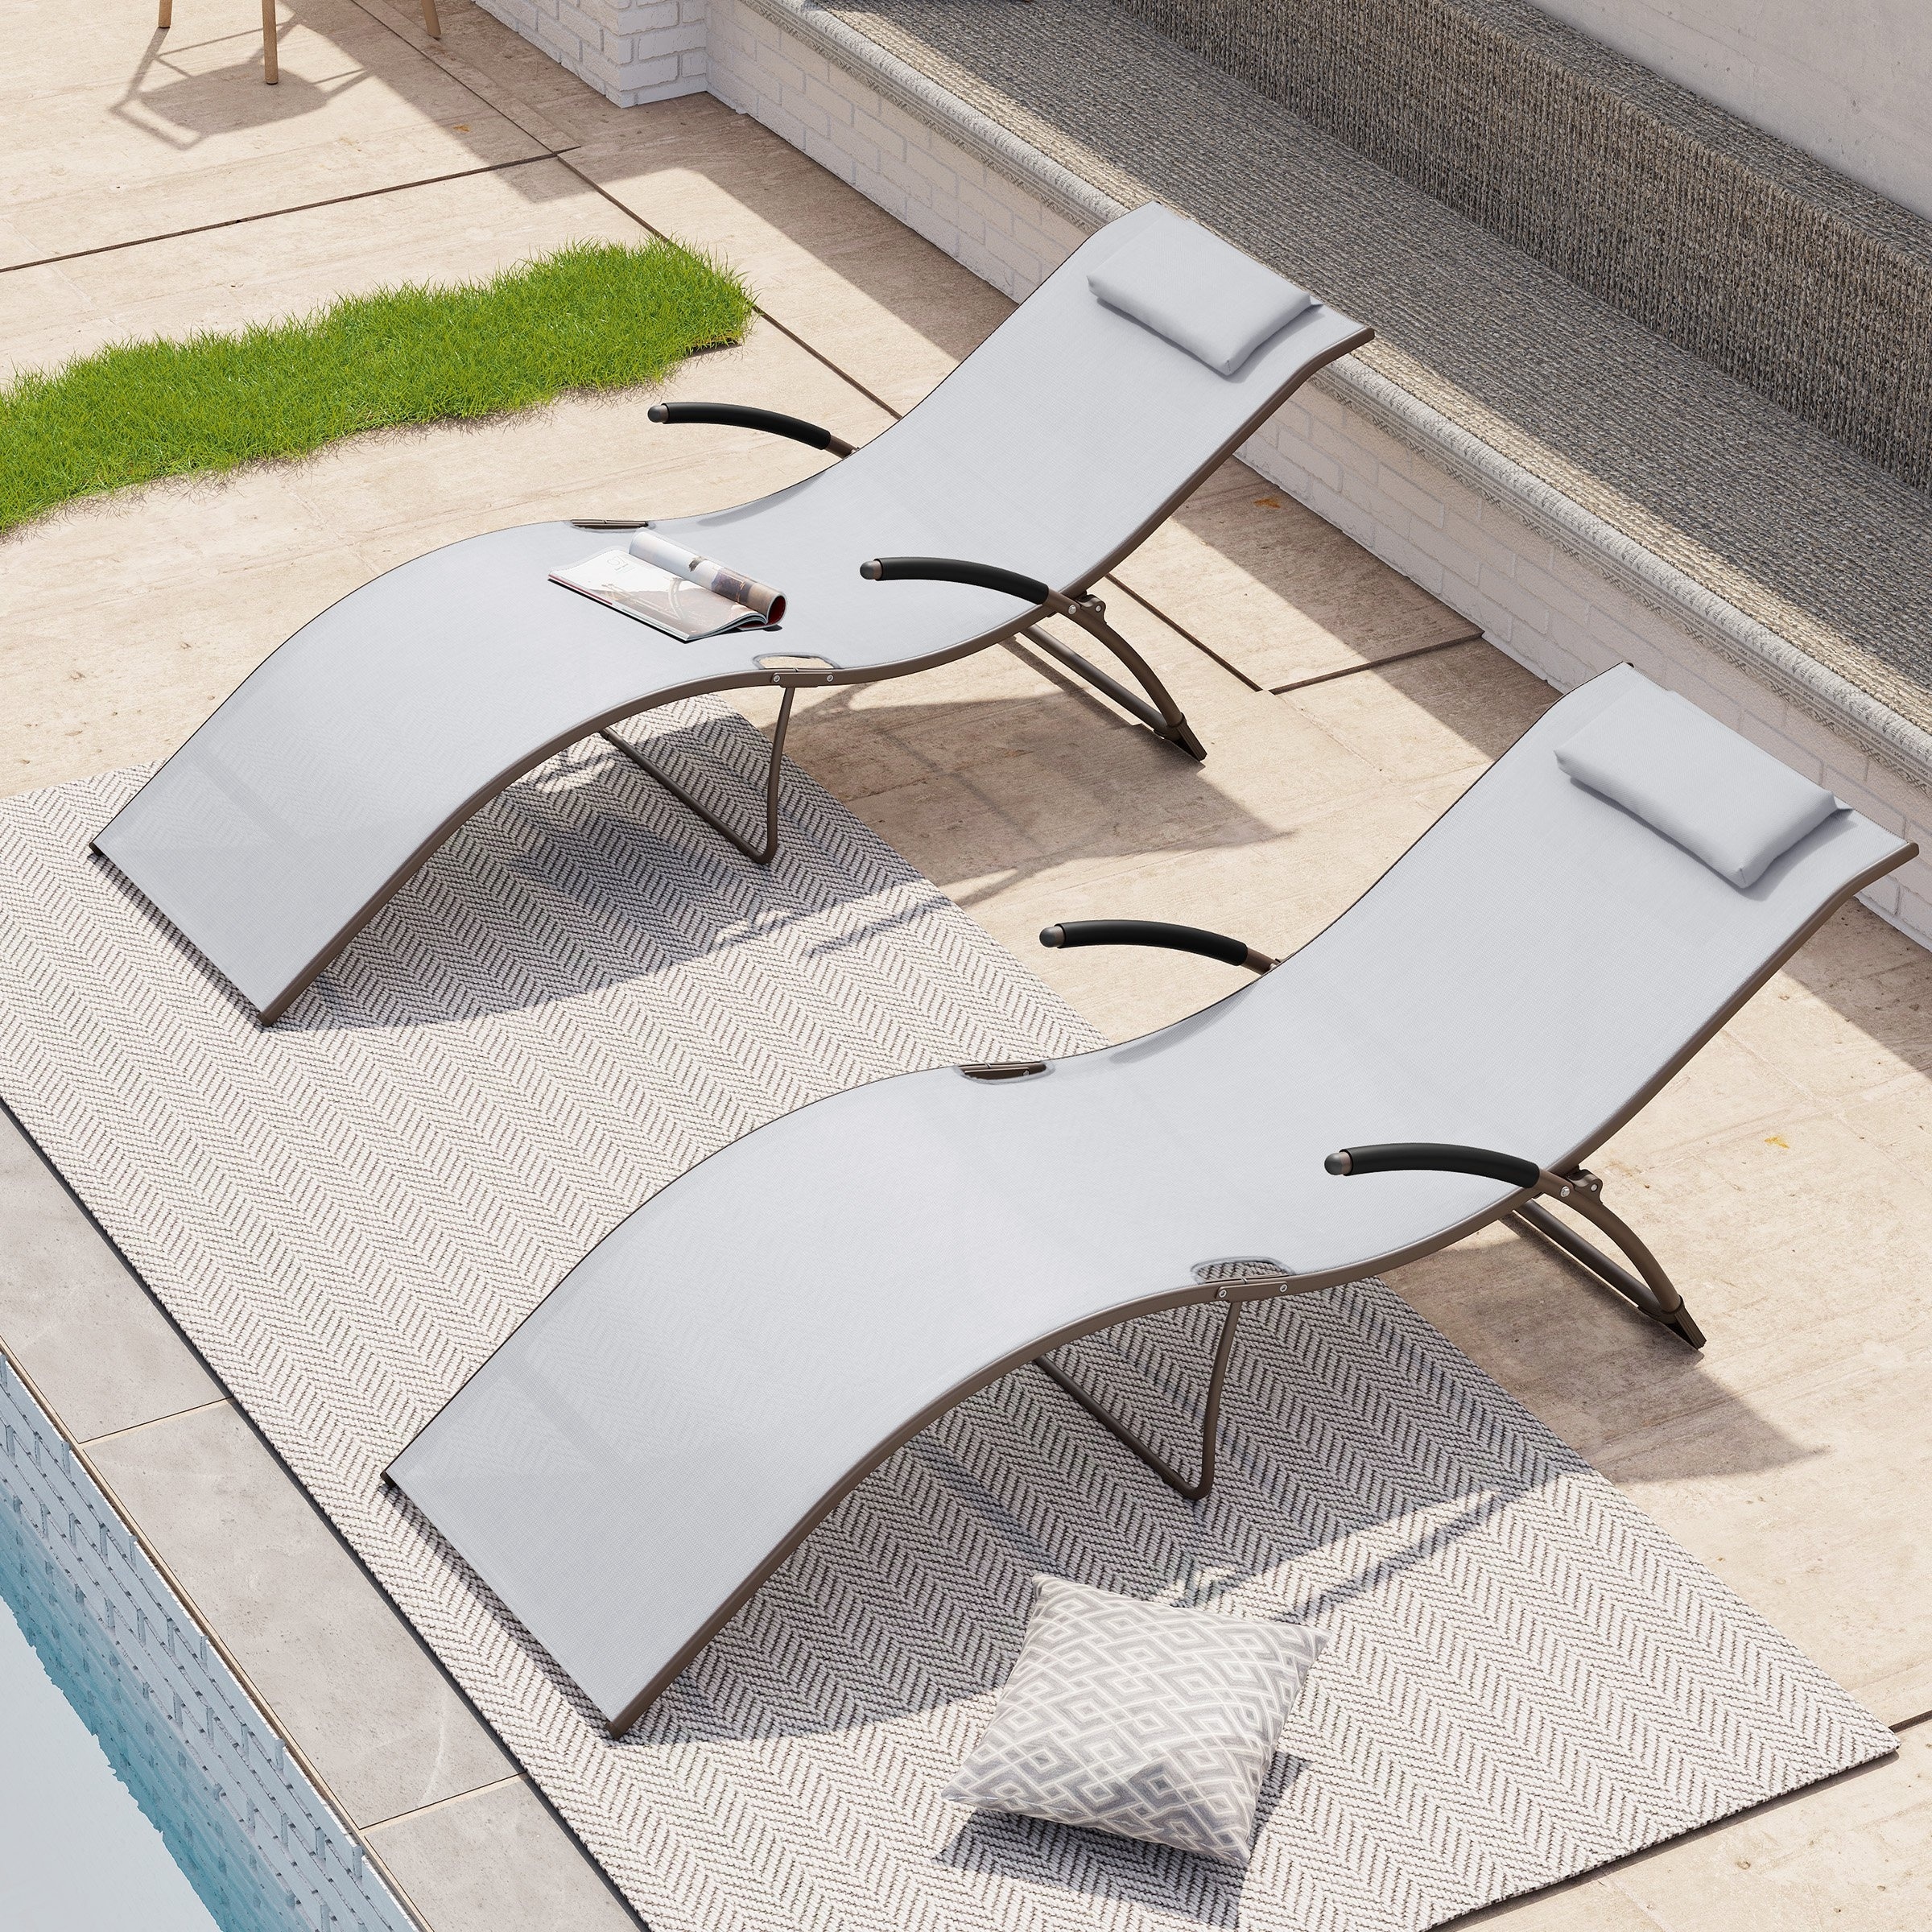 Crestlive Products Outdoor Reclining Folding Chaise Lounge Chairs (set Of 2) - 69.09 L * 24.61 W * 26 H